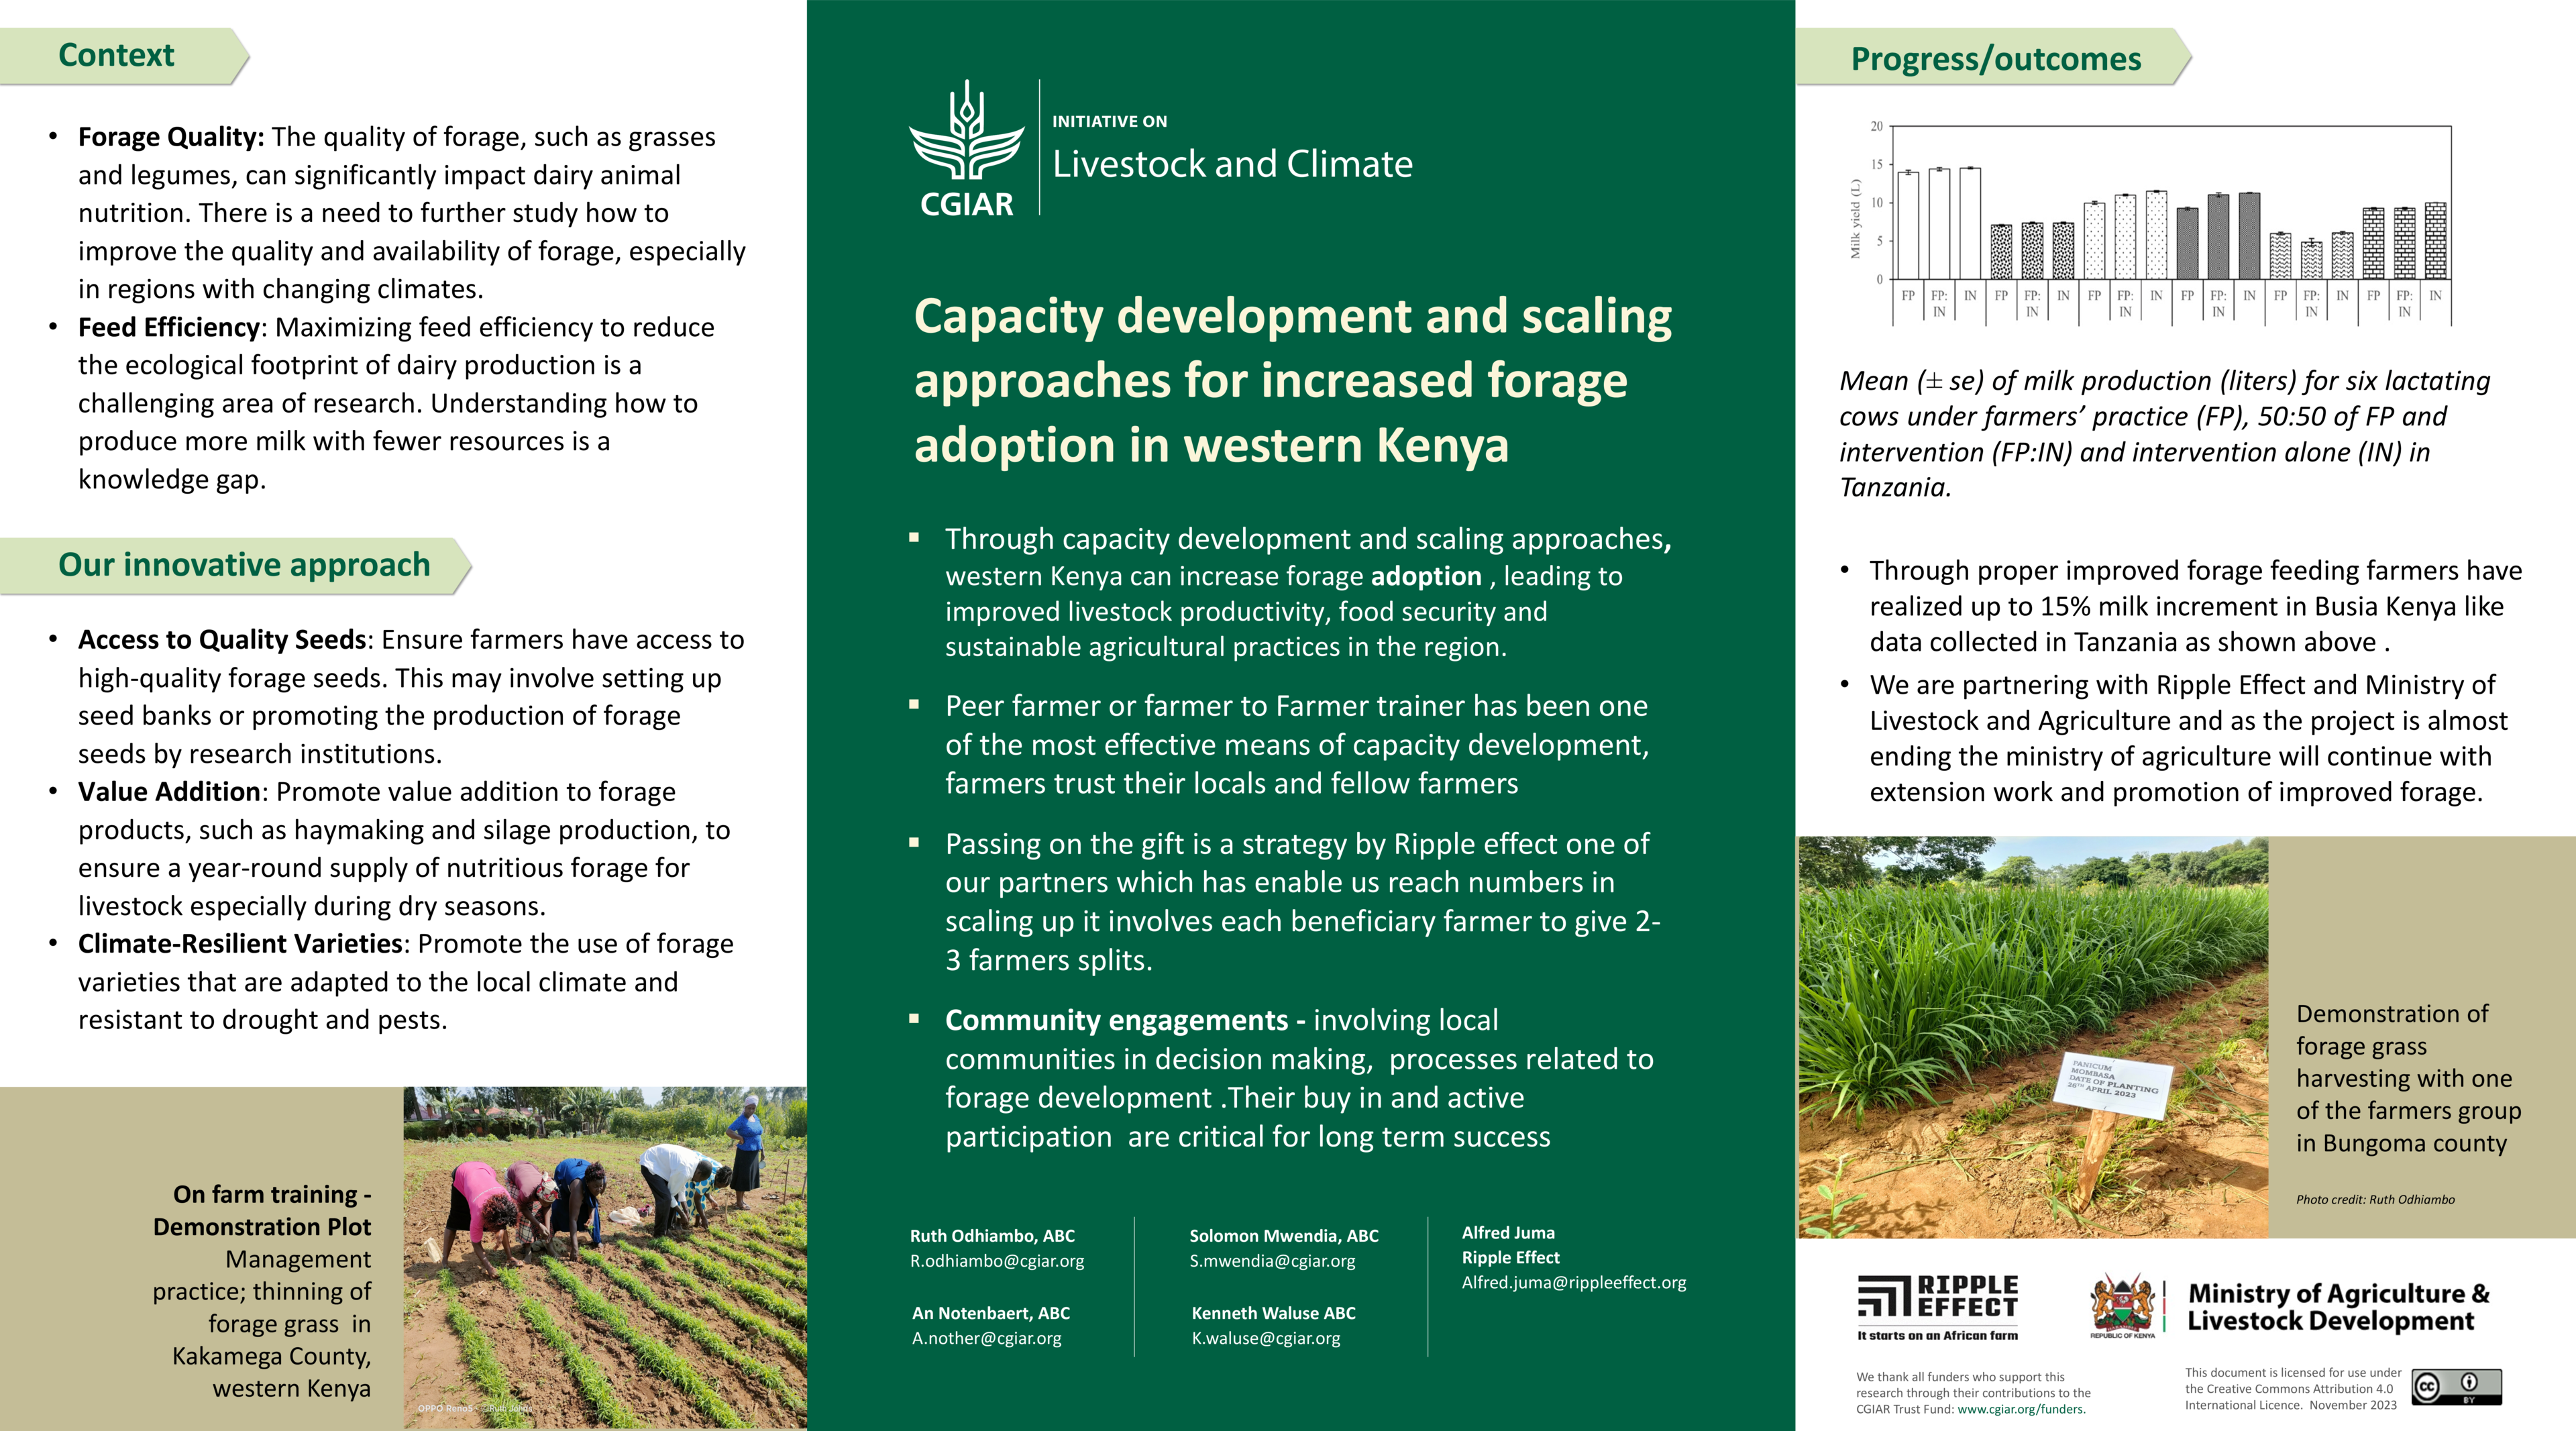 Capacity development and scaling approaches for increased forage adoption in western Kenya